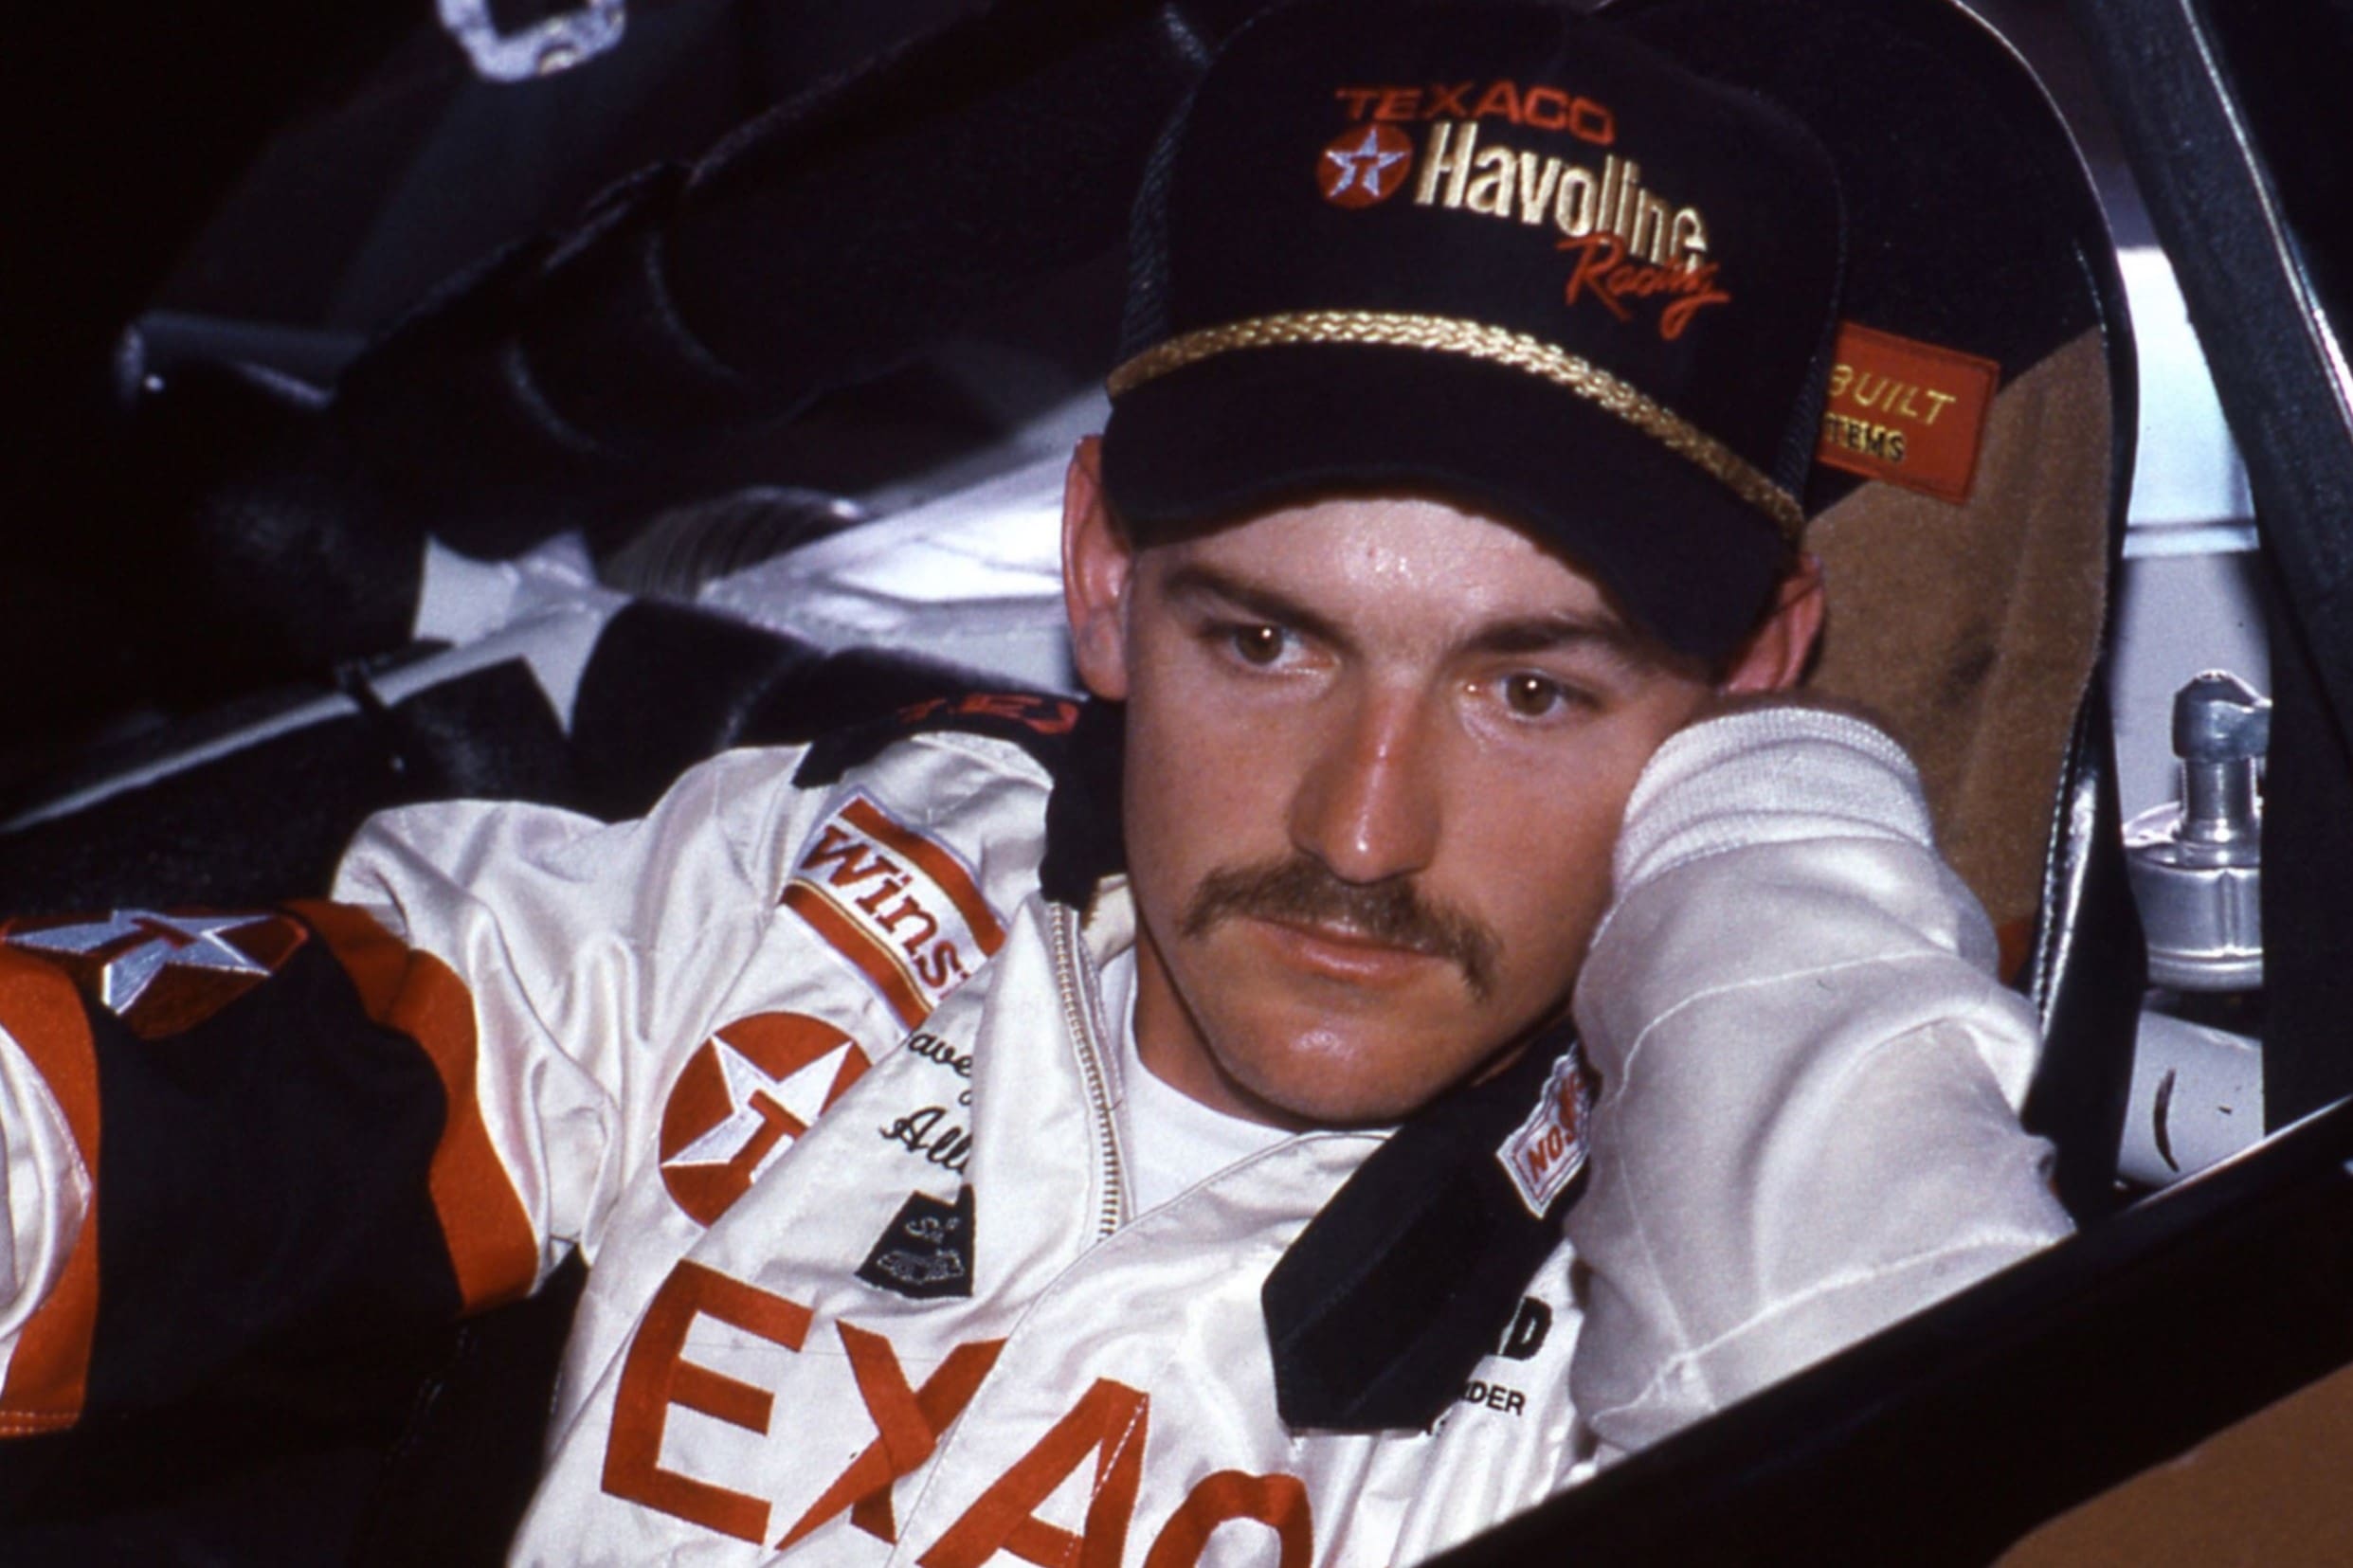 9-astounding-facts-about-davey-allison